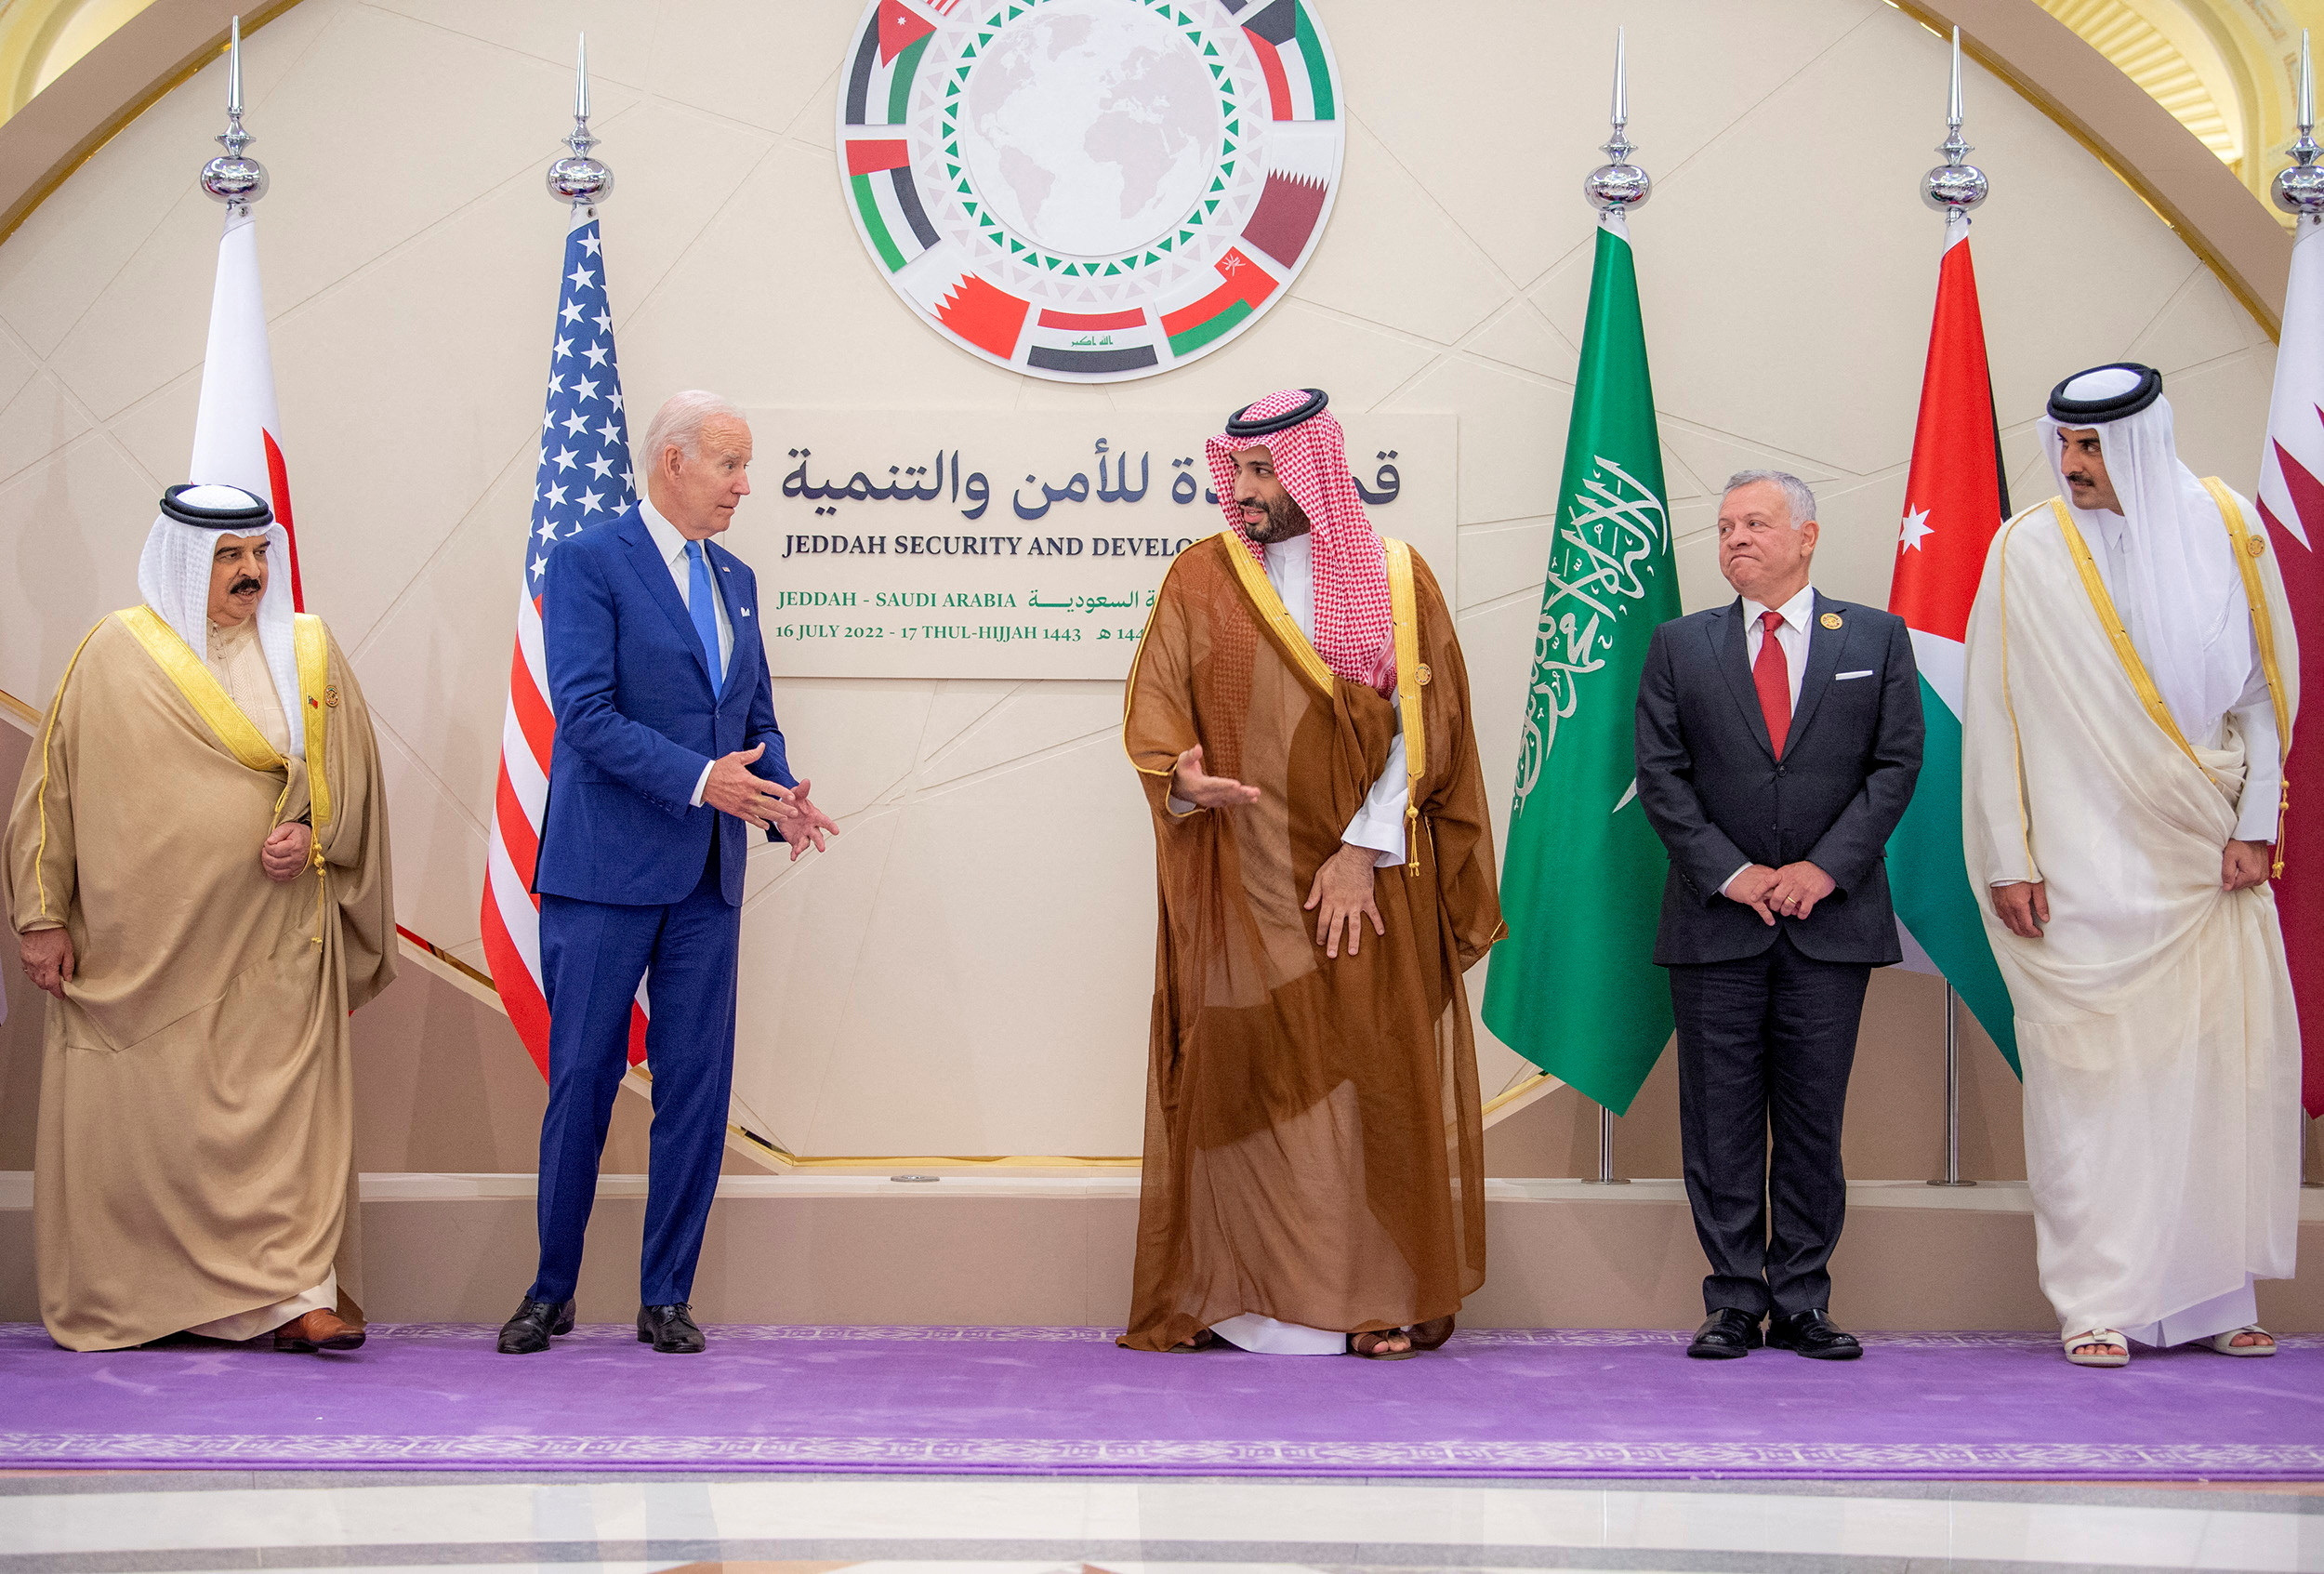 Family photo of leaders ahead of the Jeddah Security and Development Summit in Jeddah